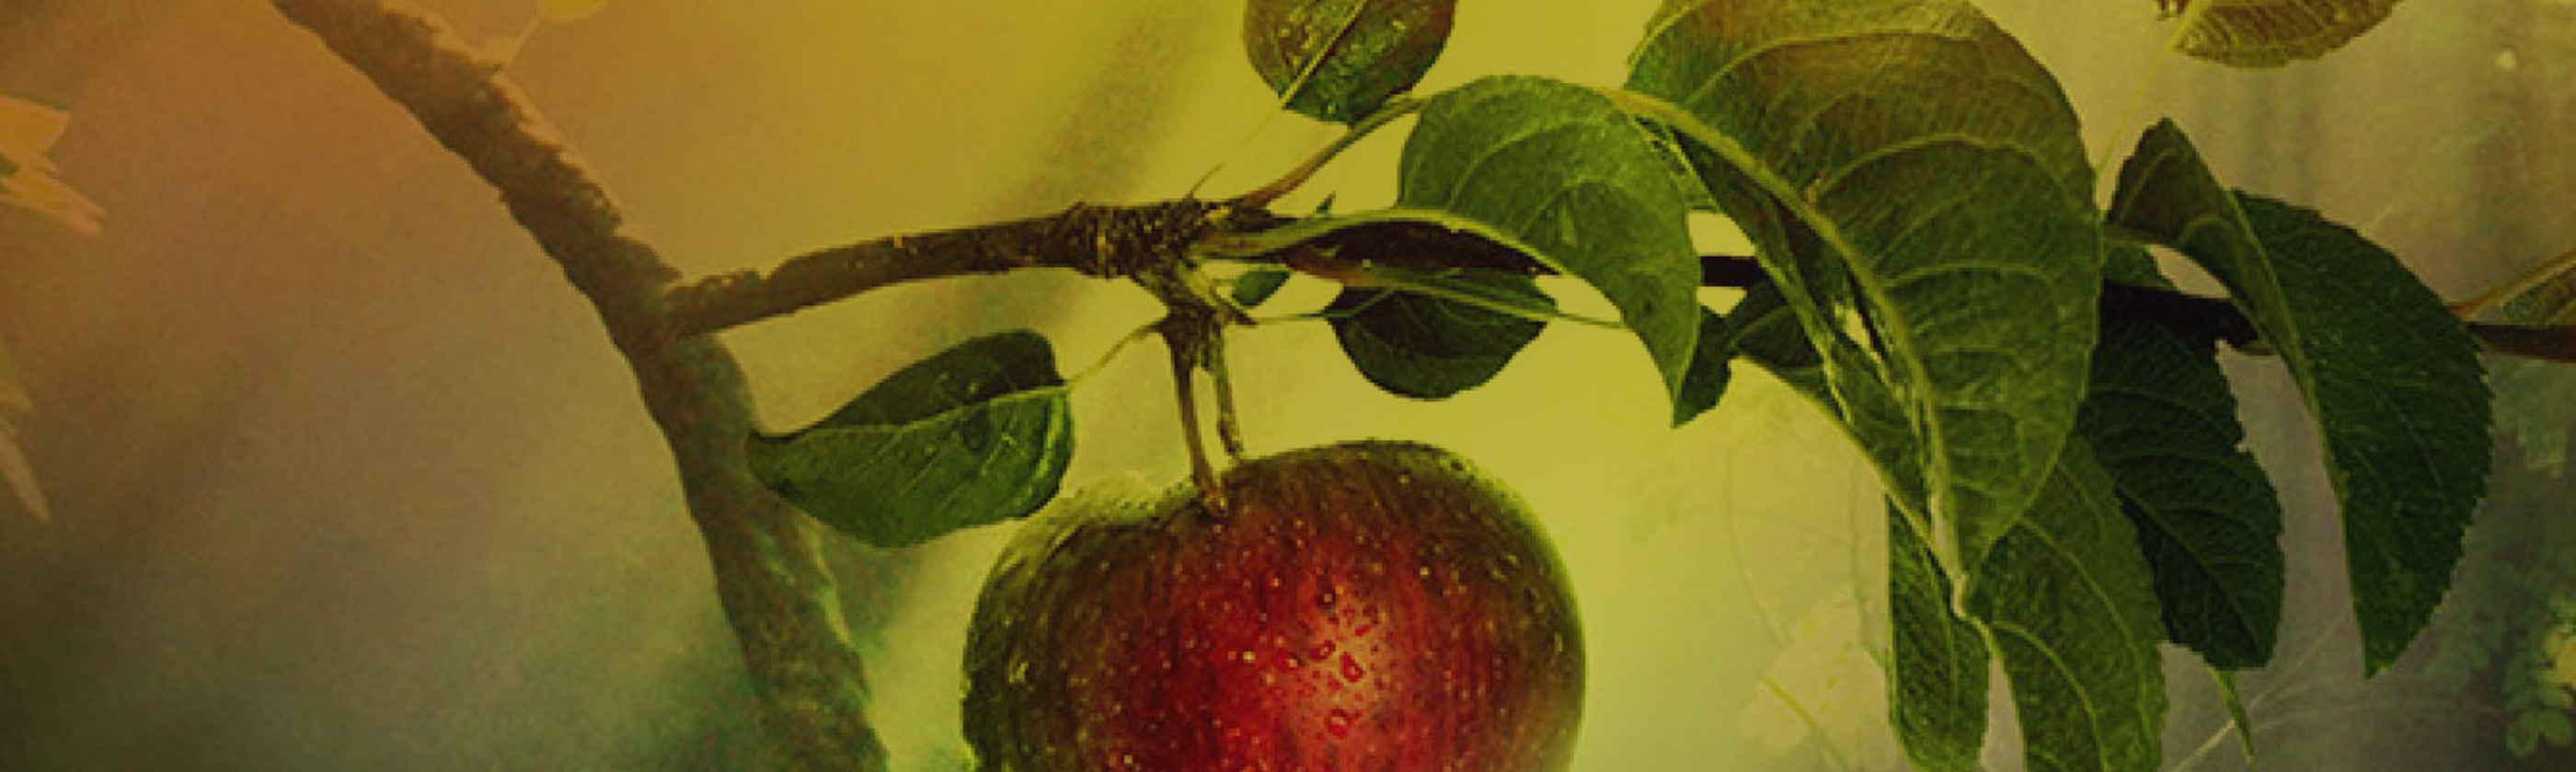 eve-banner